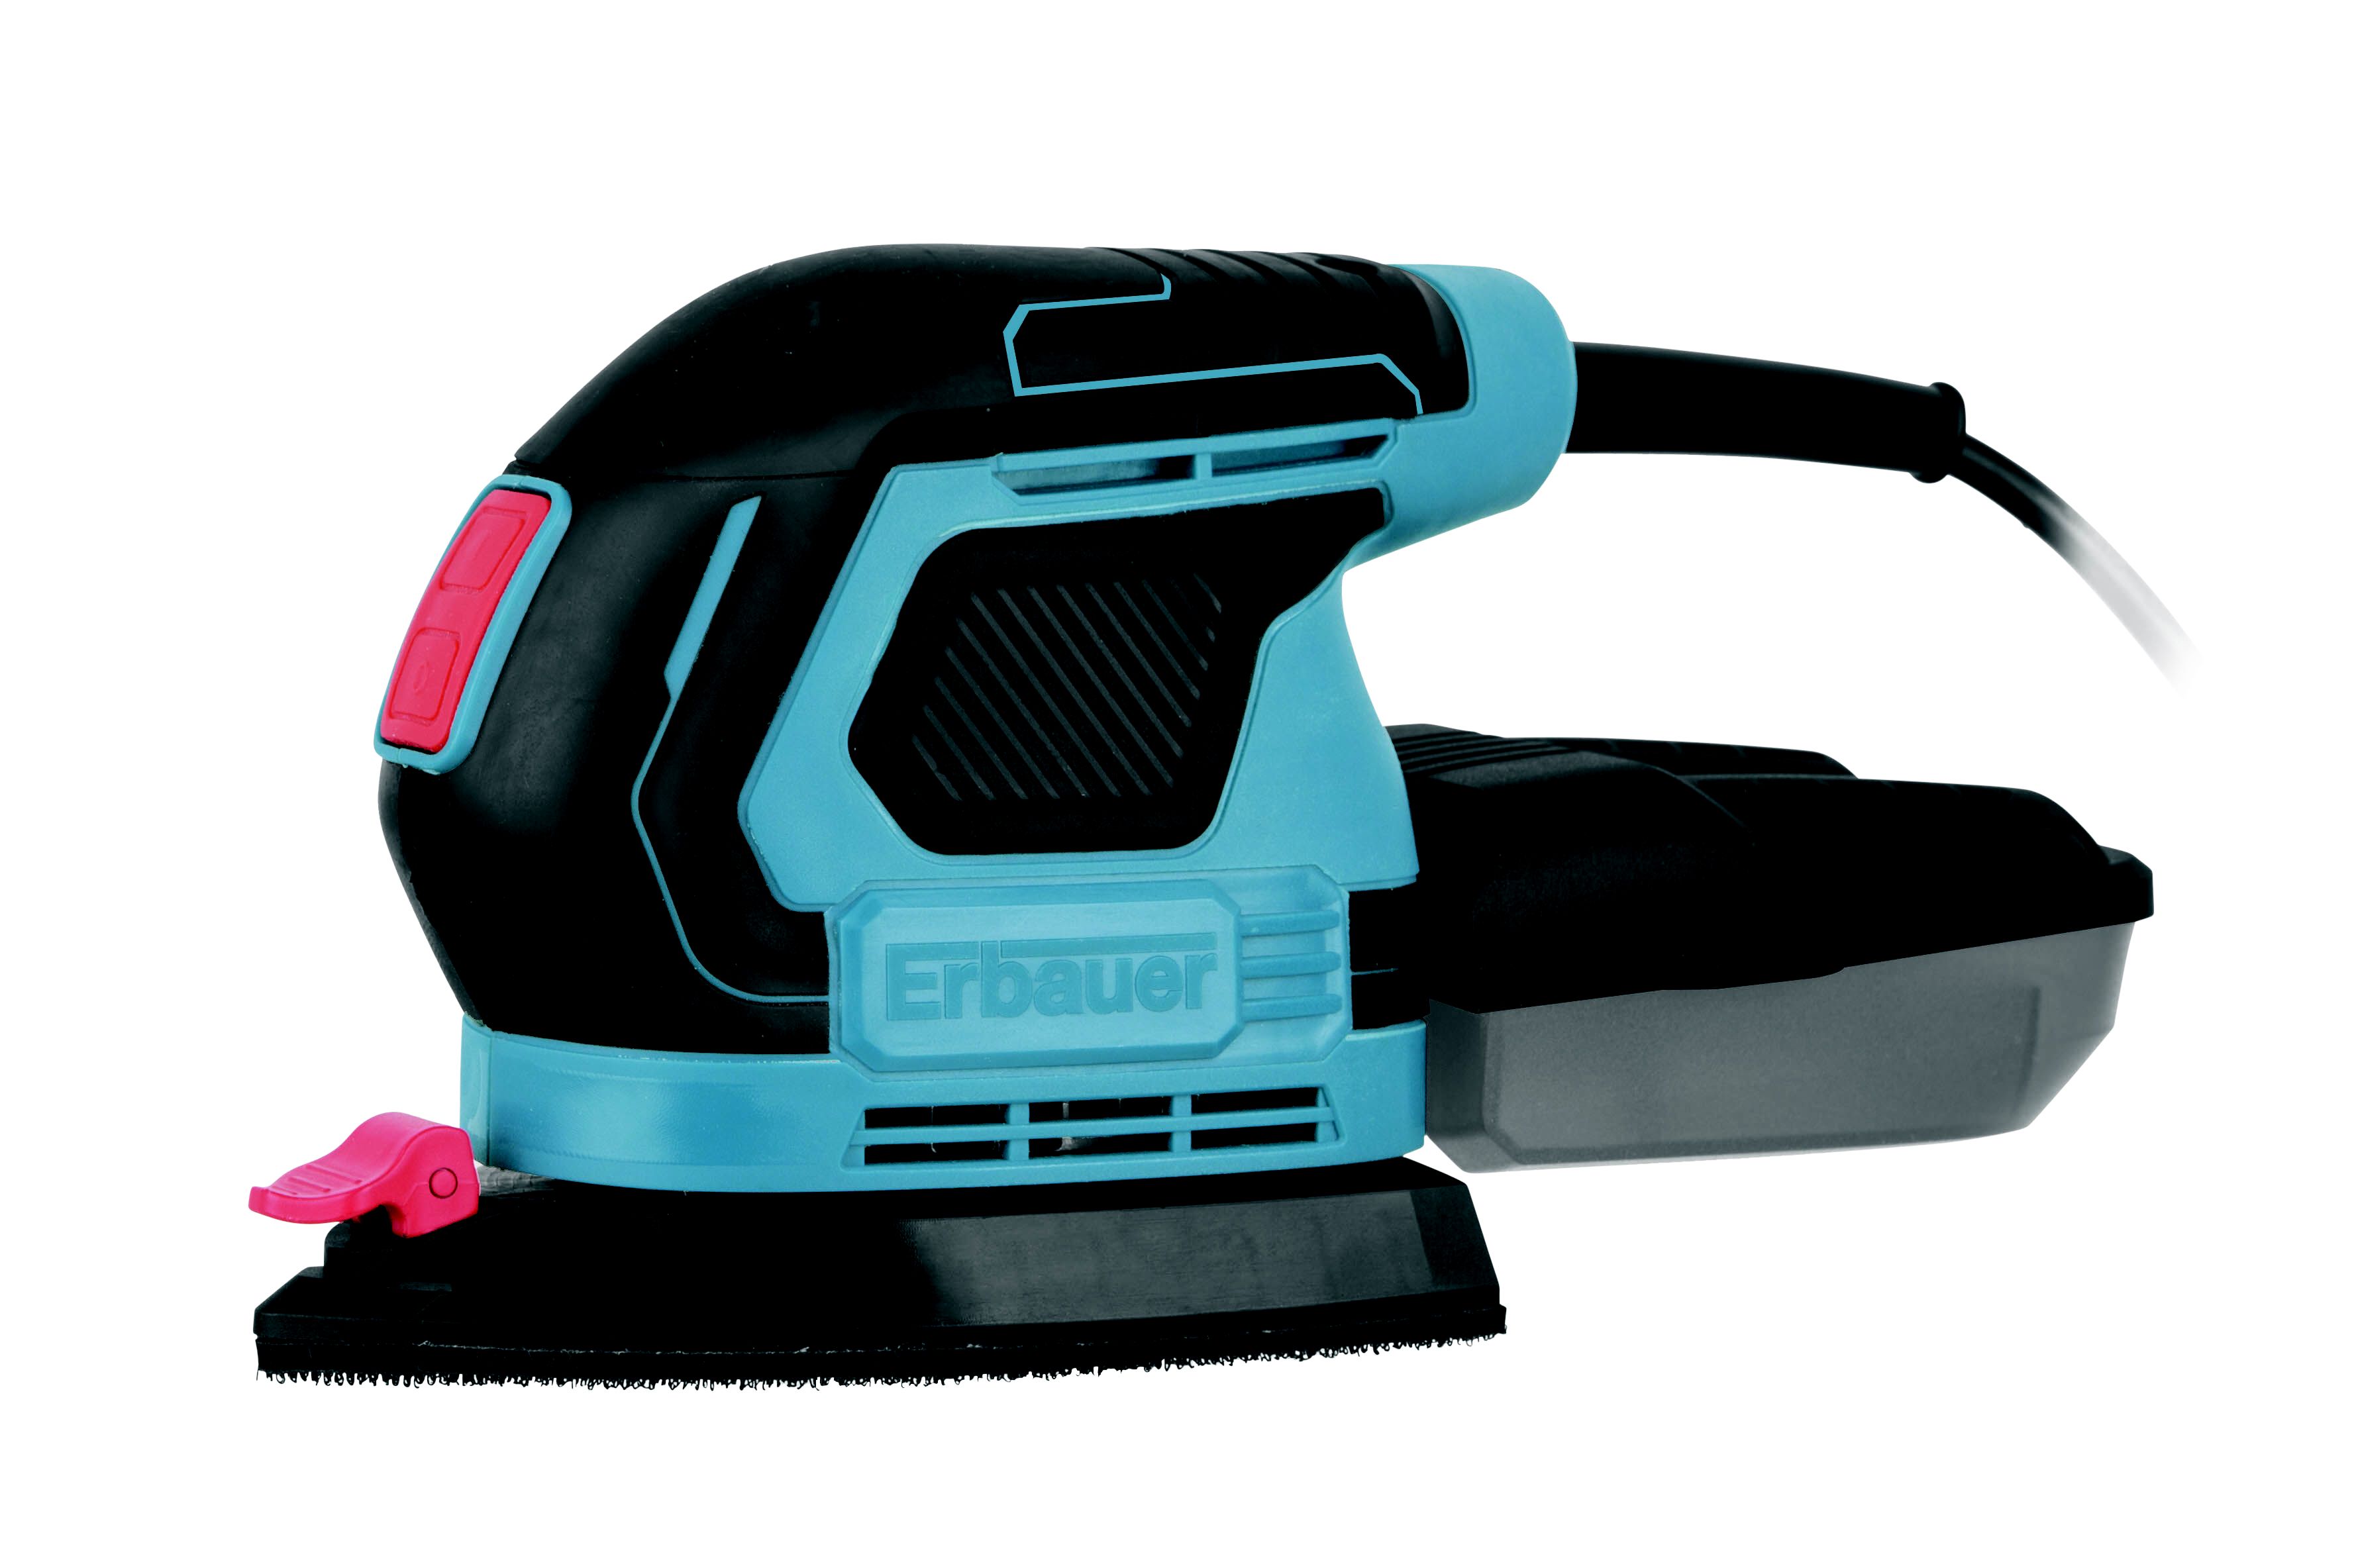 BLACK & DECKER BEW230BC-QS 55W Corded Mouse® sander with 15 accessories in  softbag